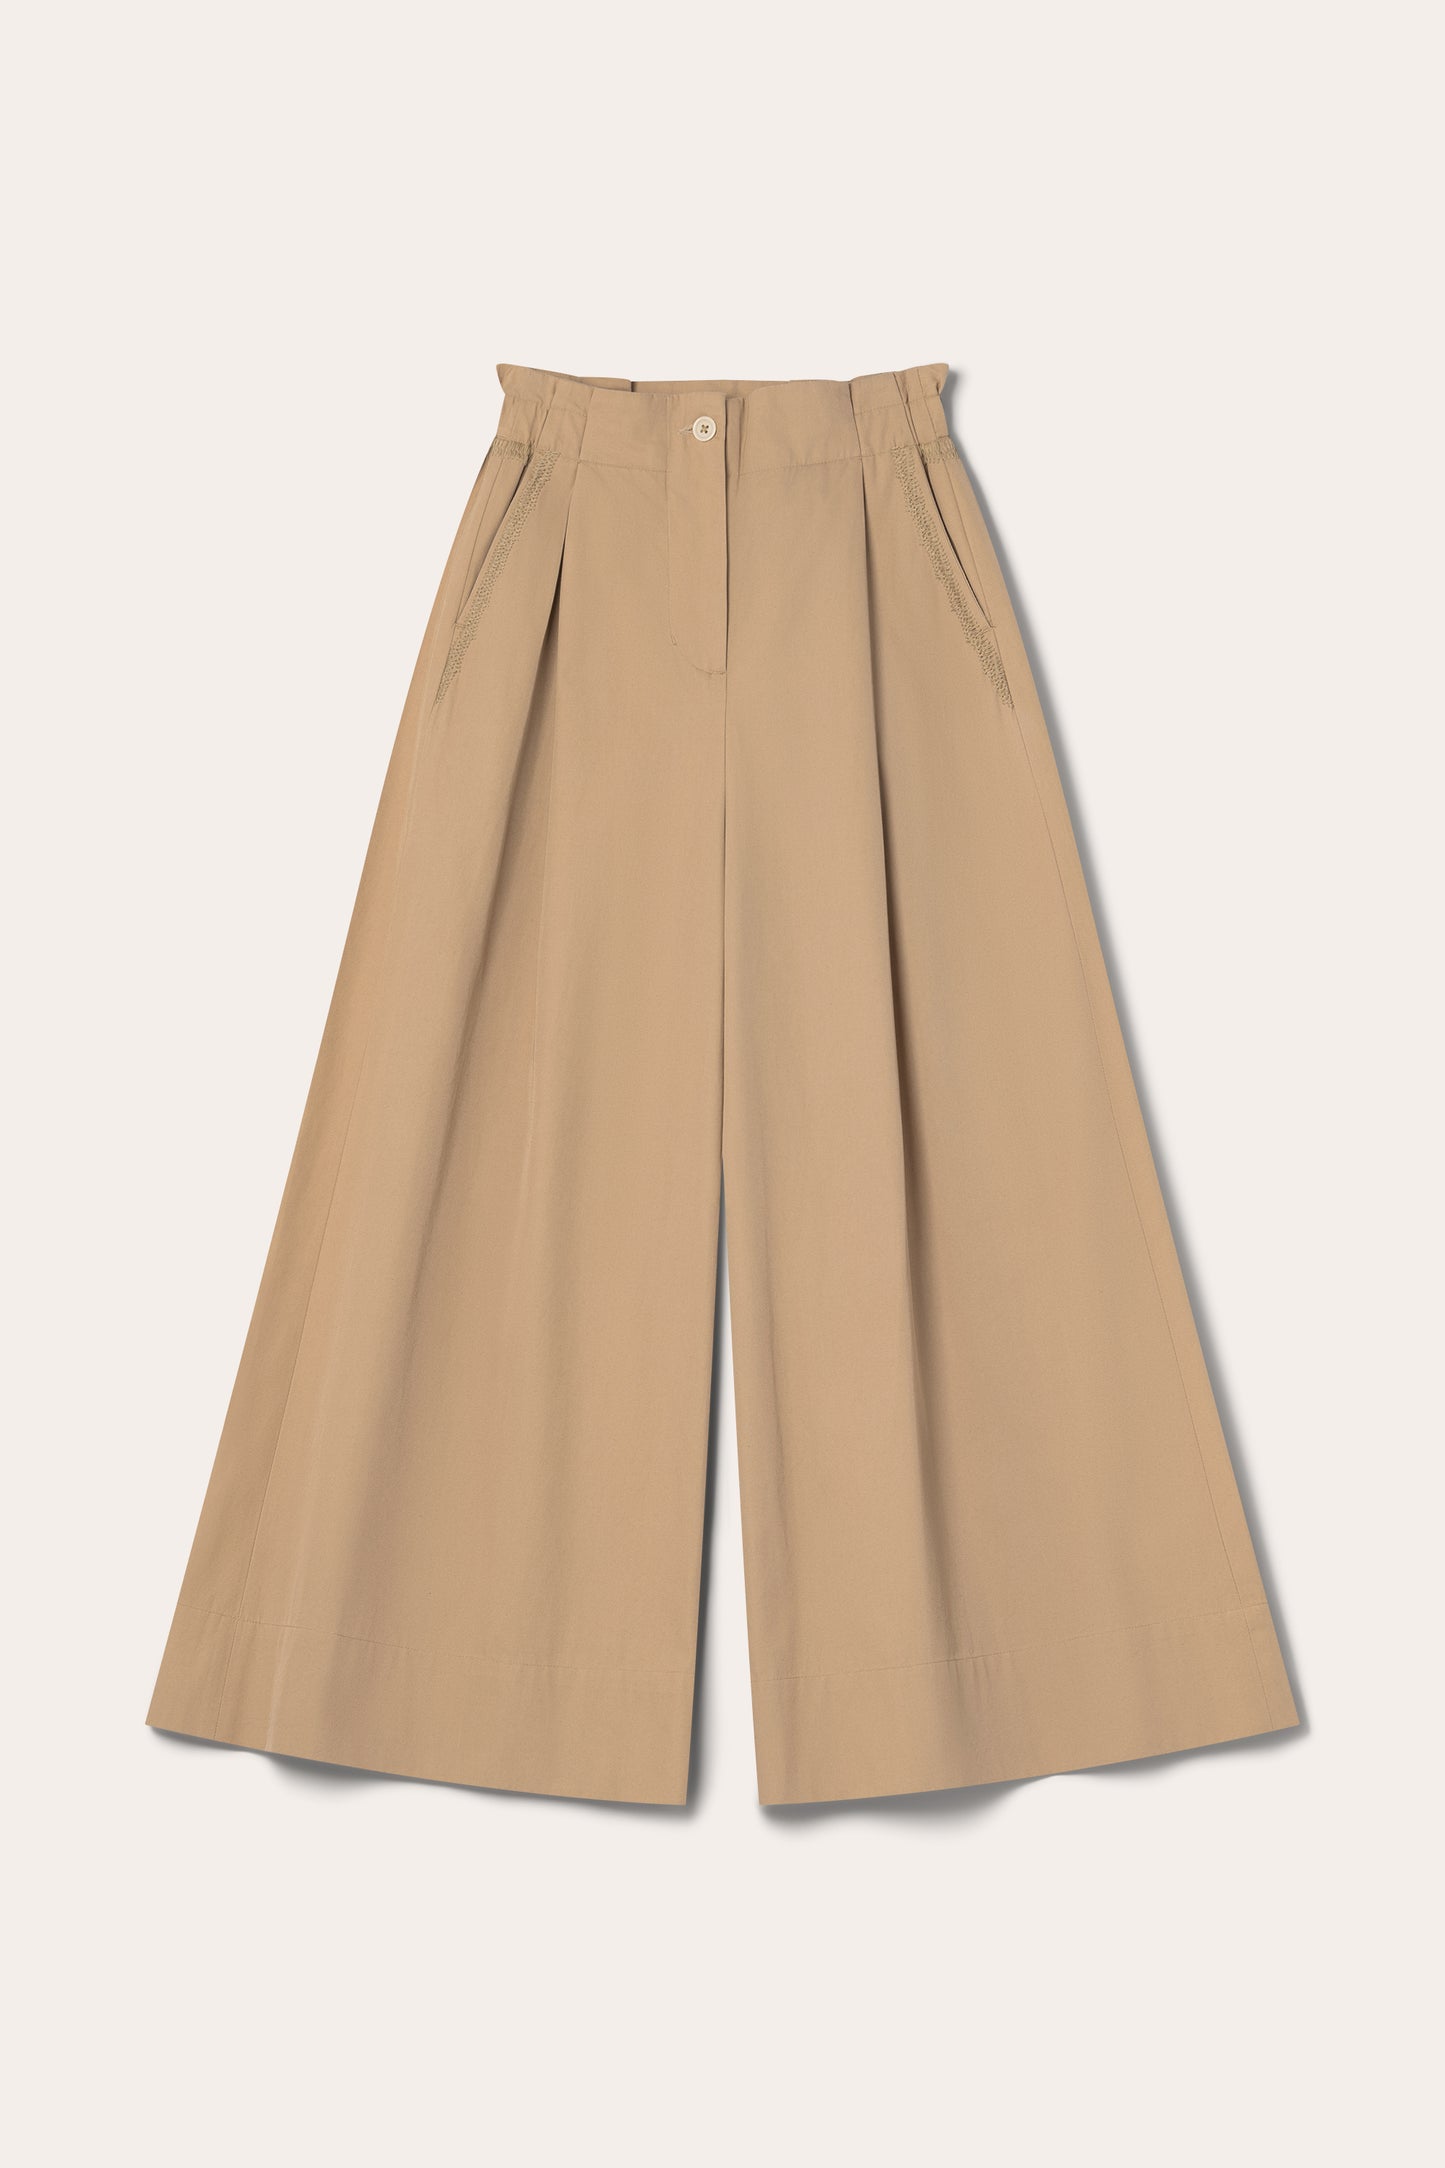 Sargent Emb Pant in Driftwood